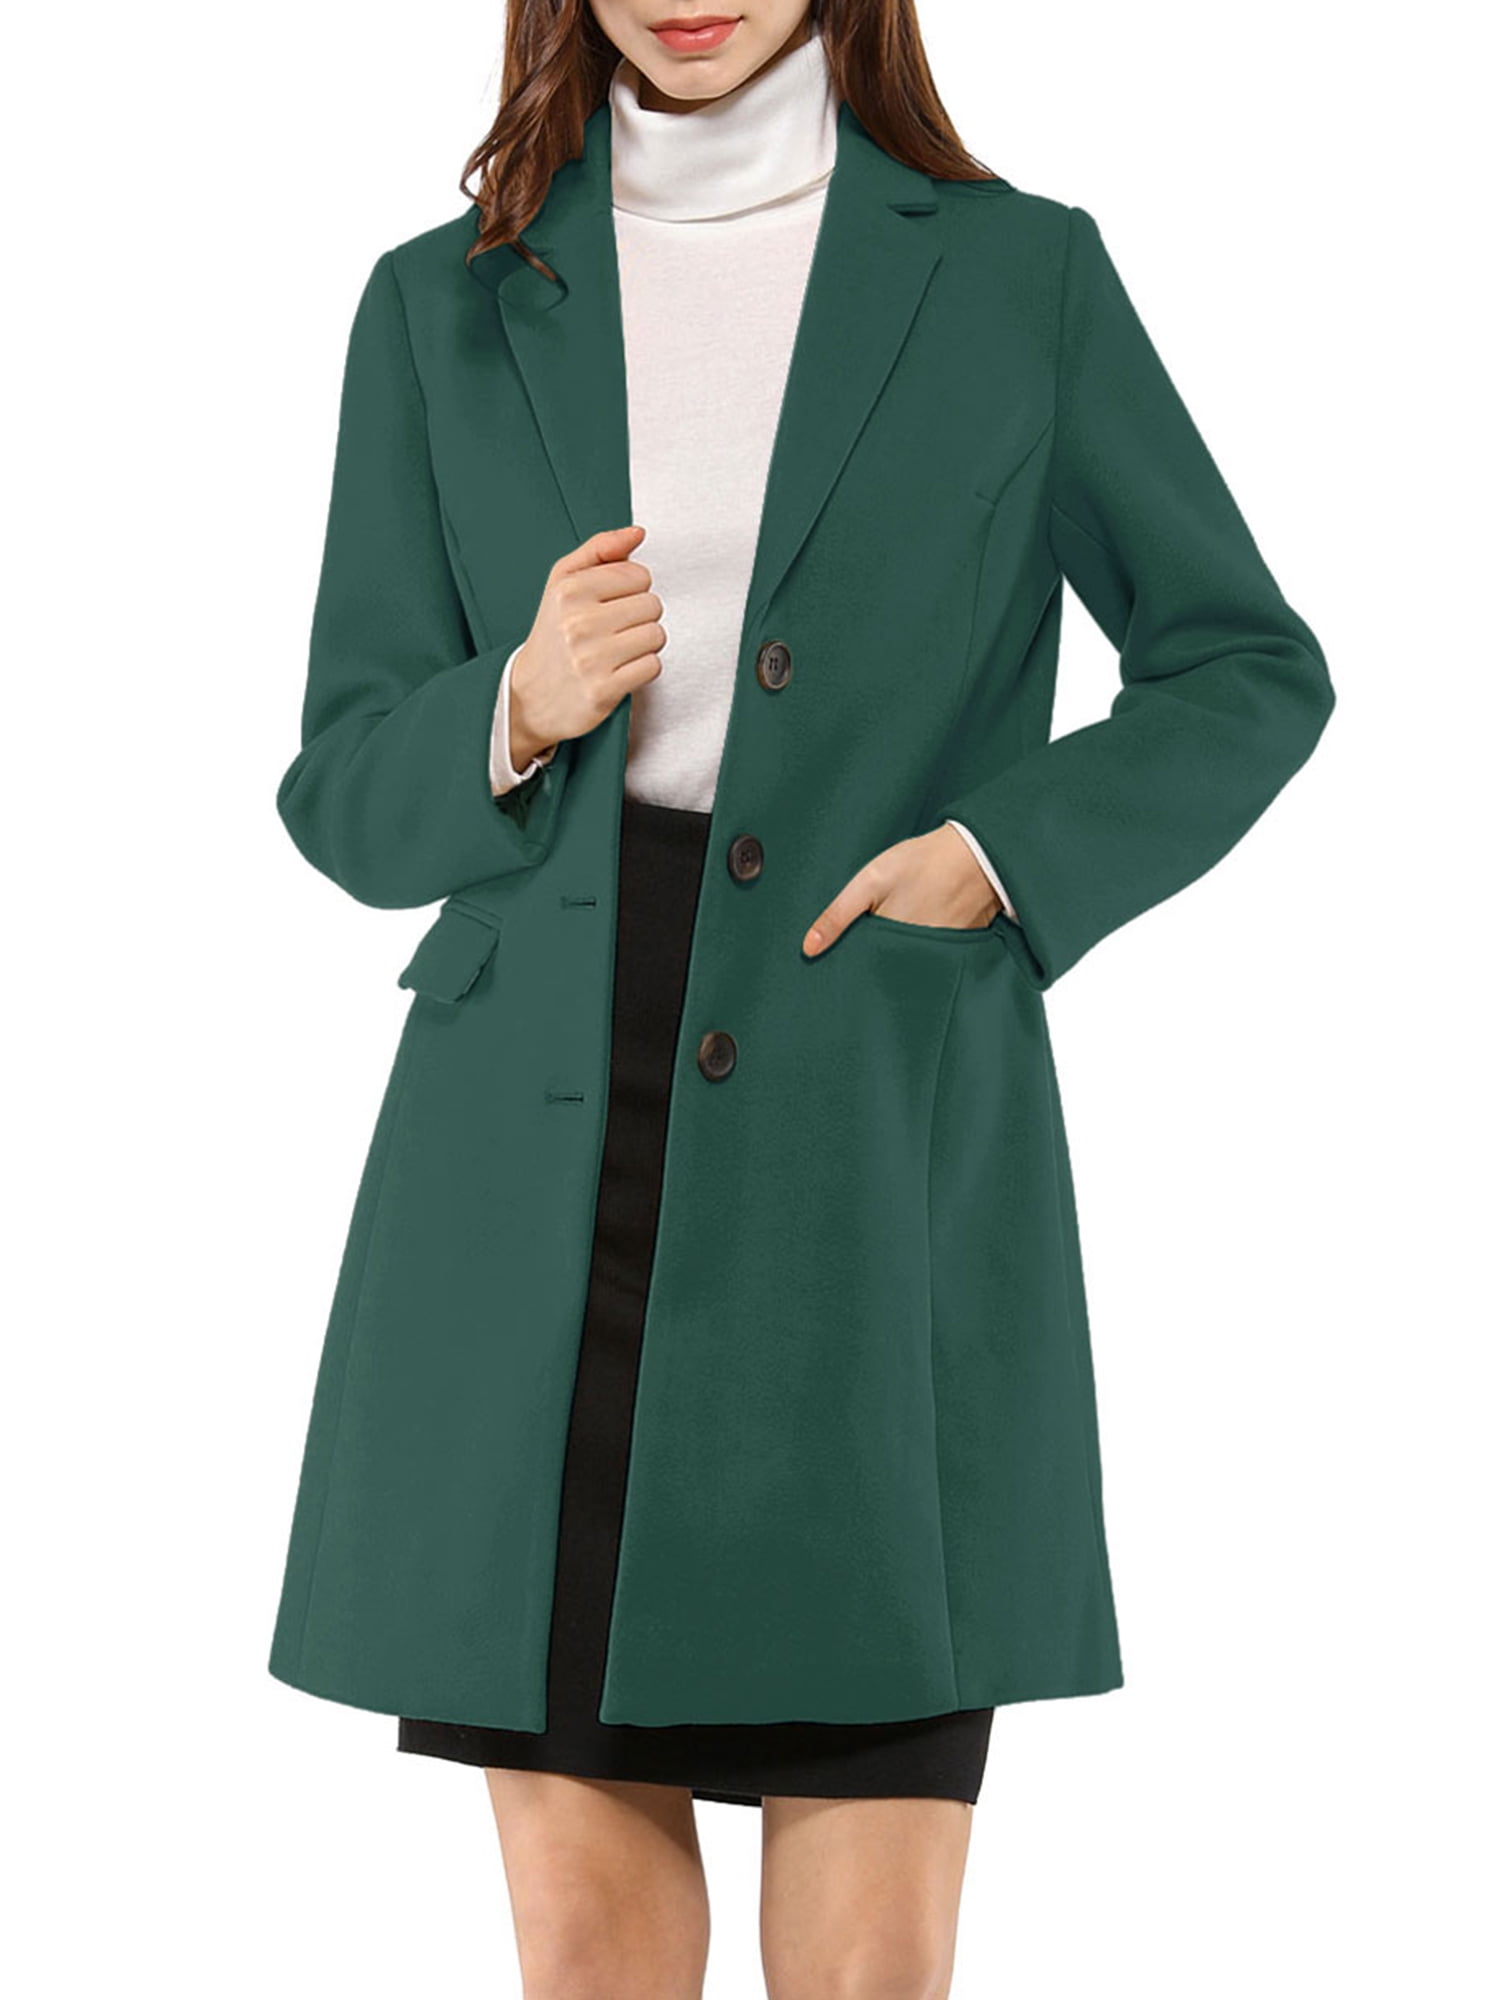 CHICKLE Womens Stand Collar Single Breasted Walker Long Wool Dress Coat